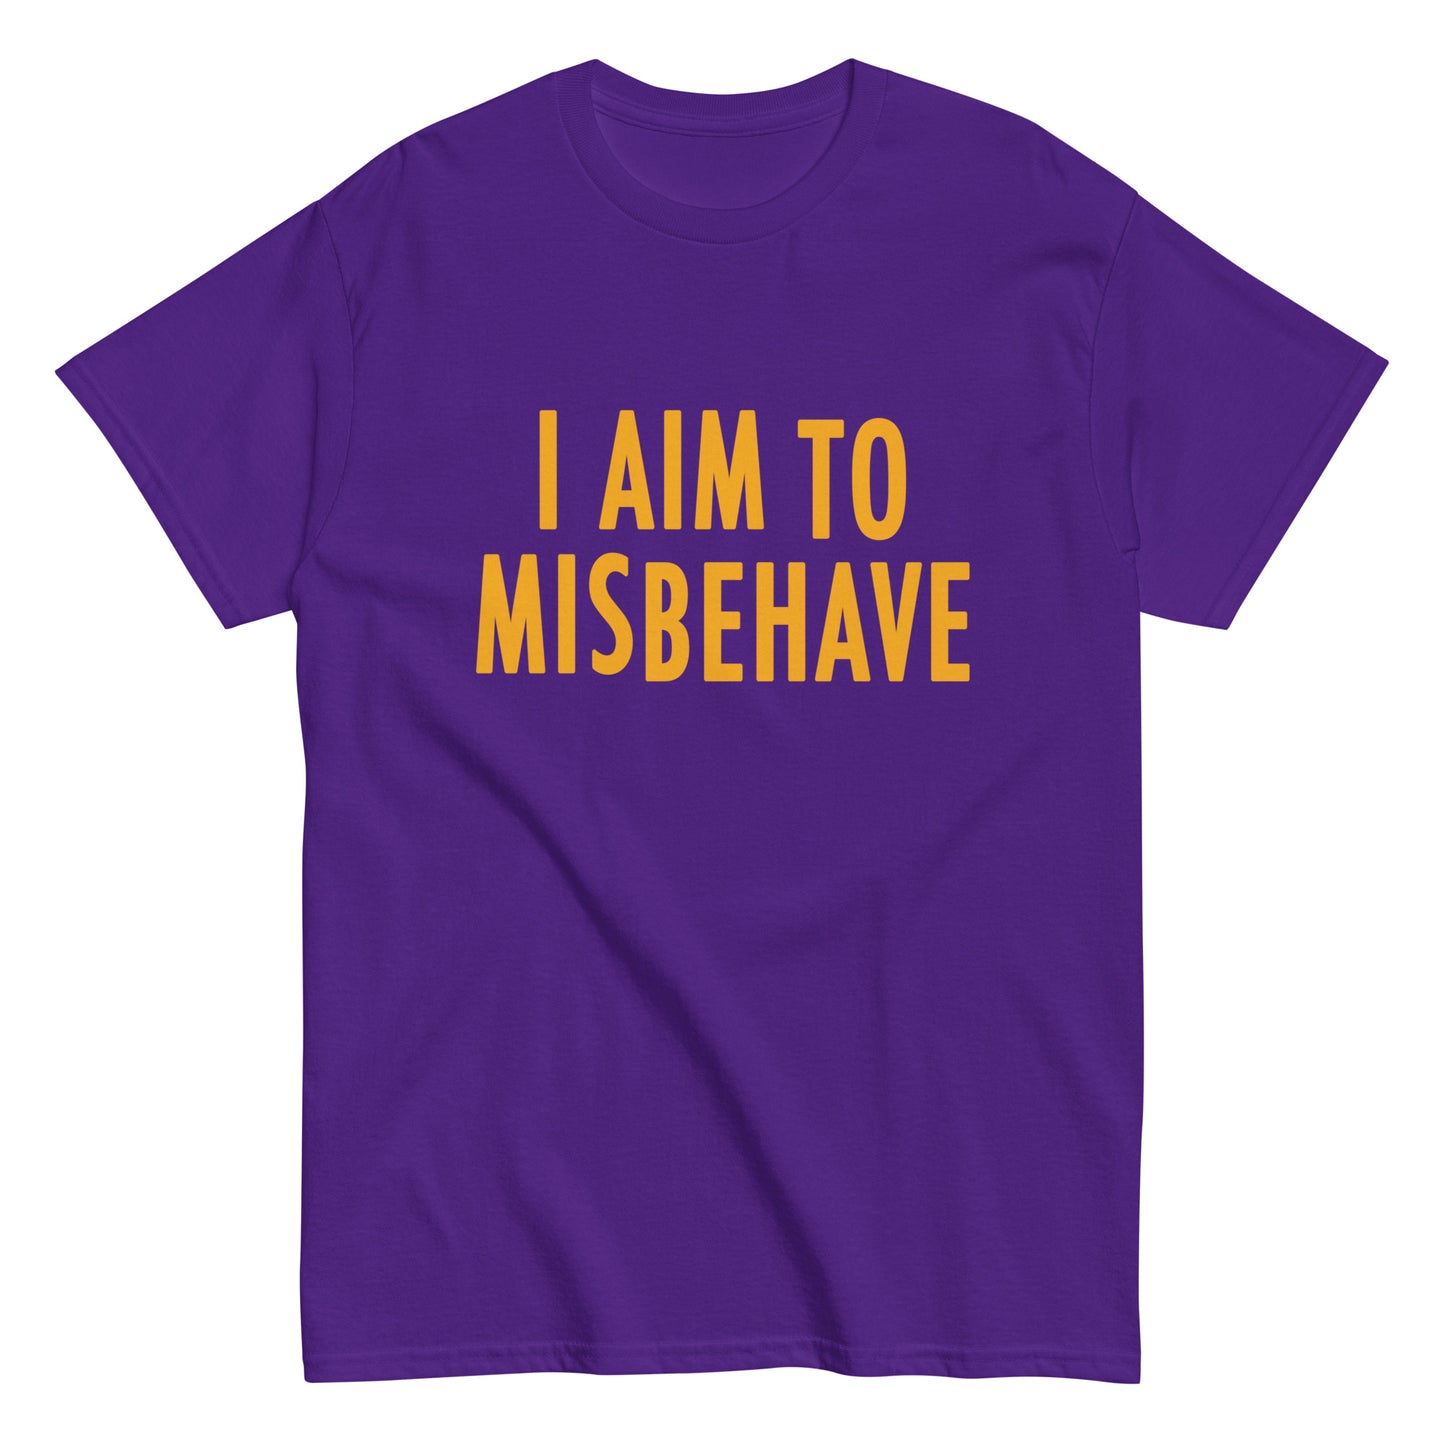 I Aim To Misbehave Men's Classic Tee